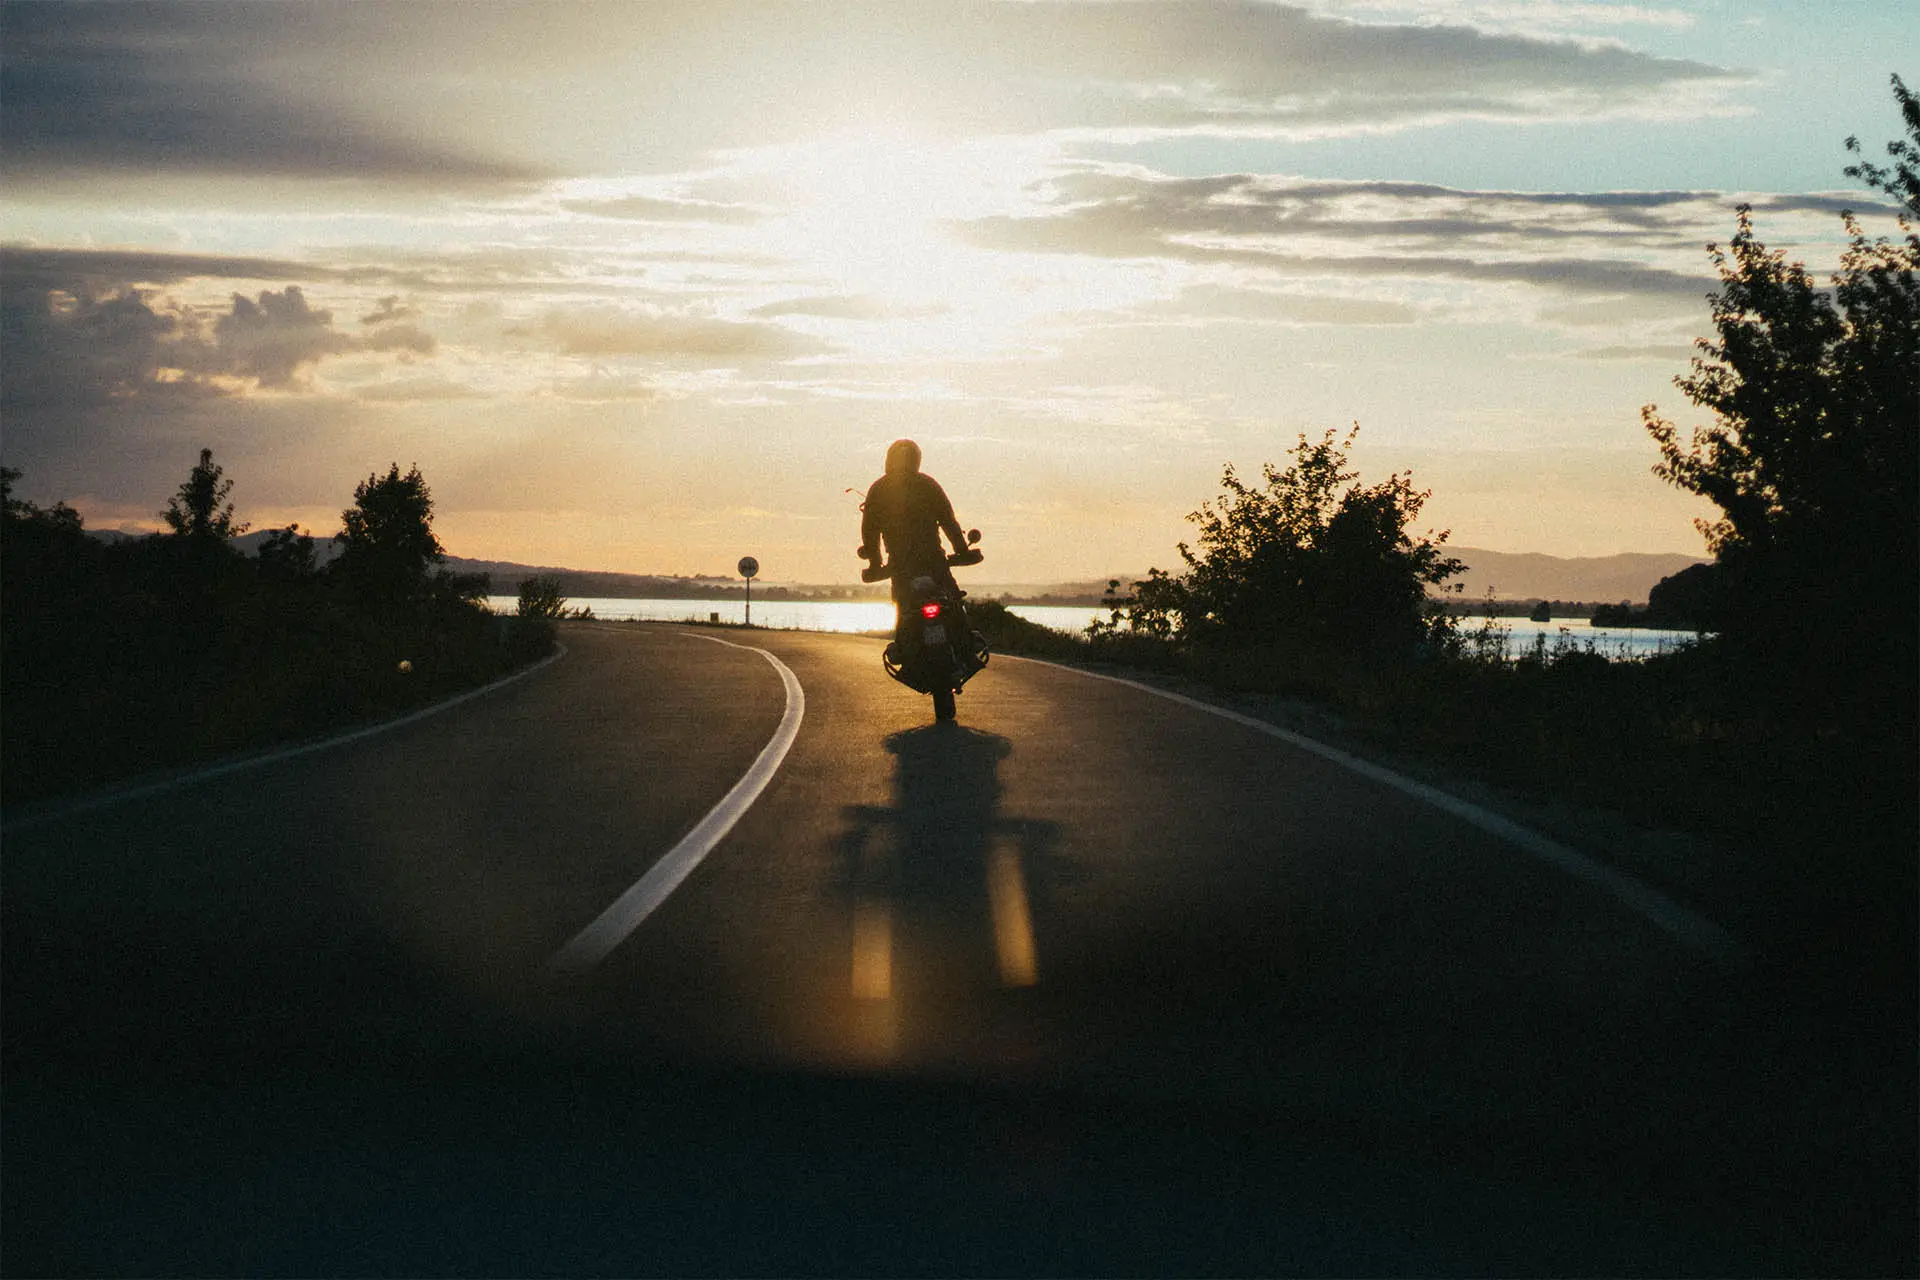 Why you may need a motorcycle accident lawyer (though we hope you don’t)